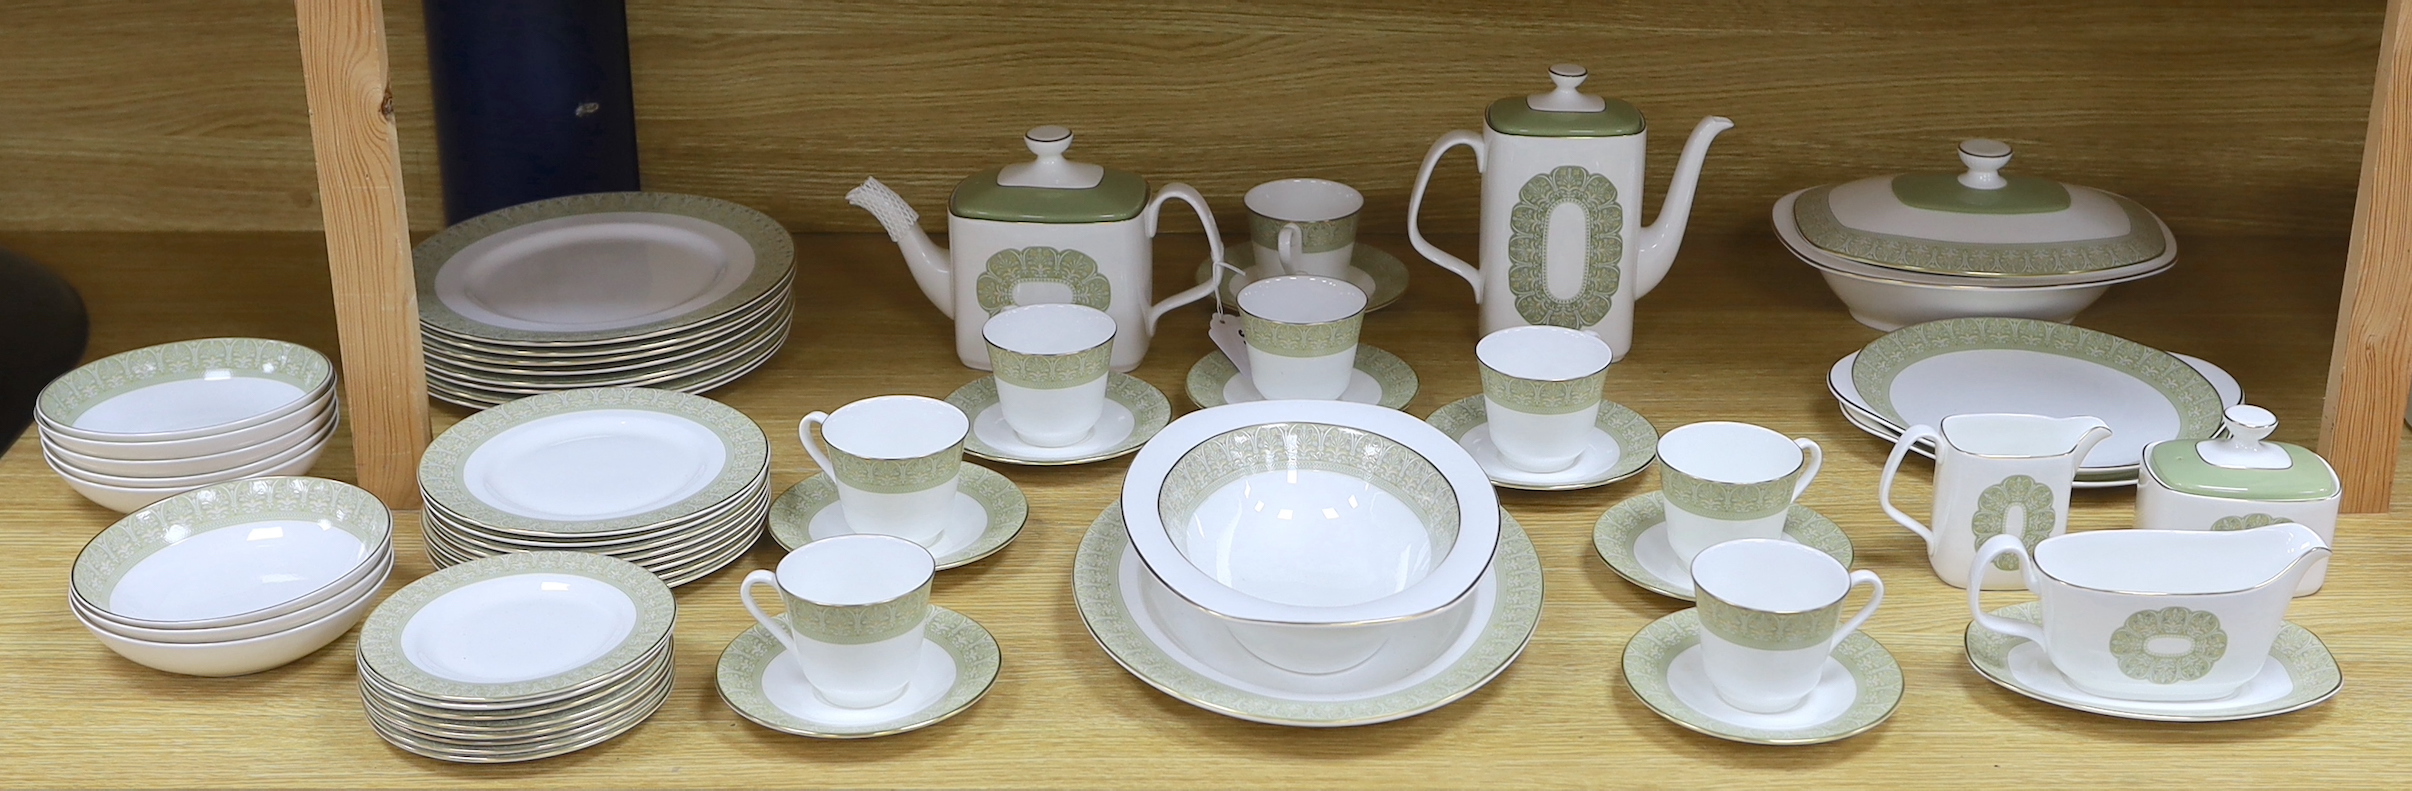 A Royal Doulton bone china dinner and tea service, Sonnet pattern                                                                                                                                                           